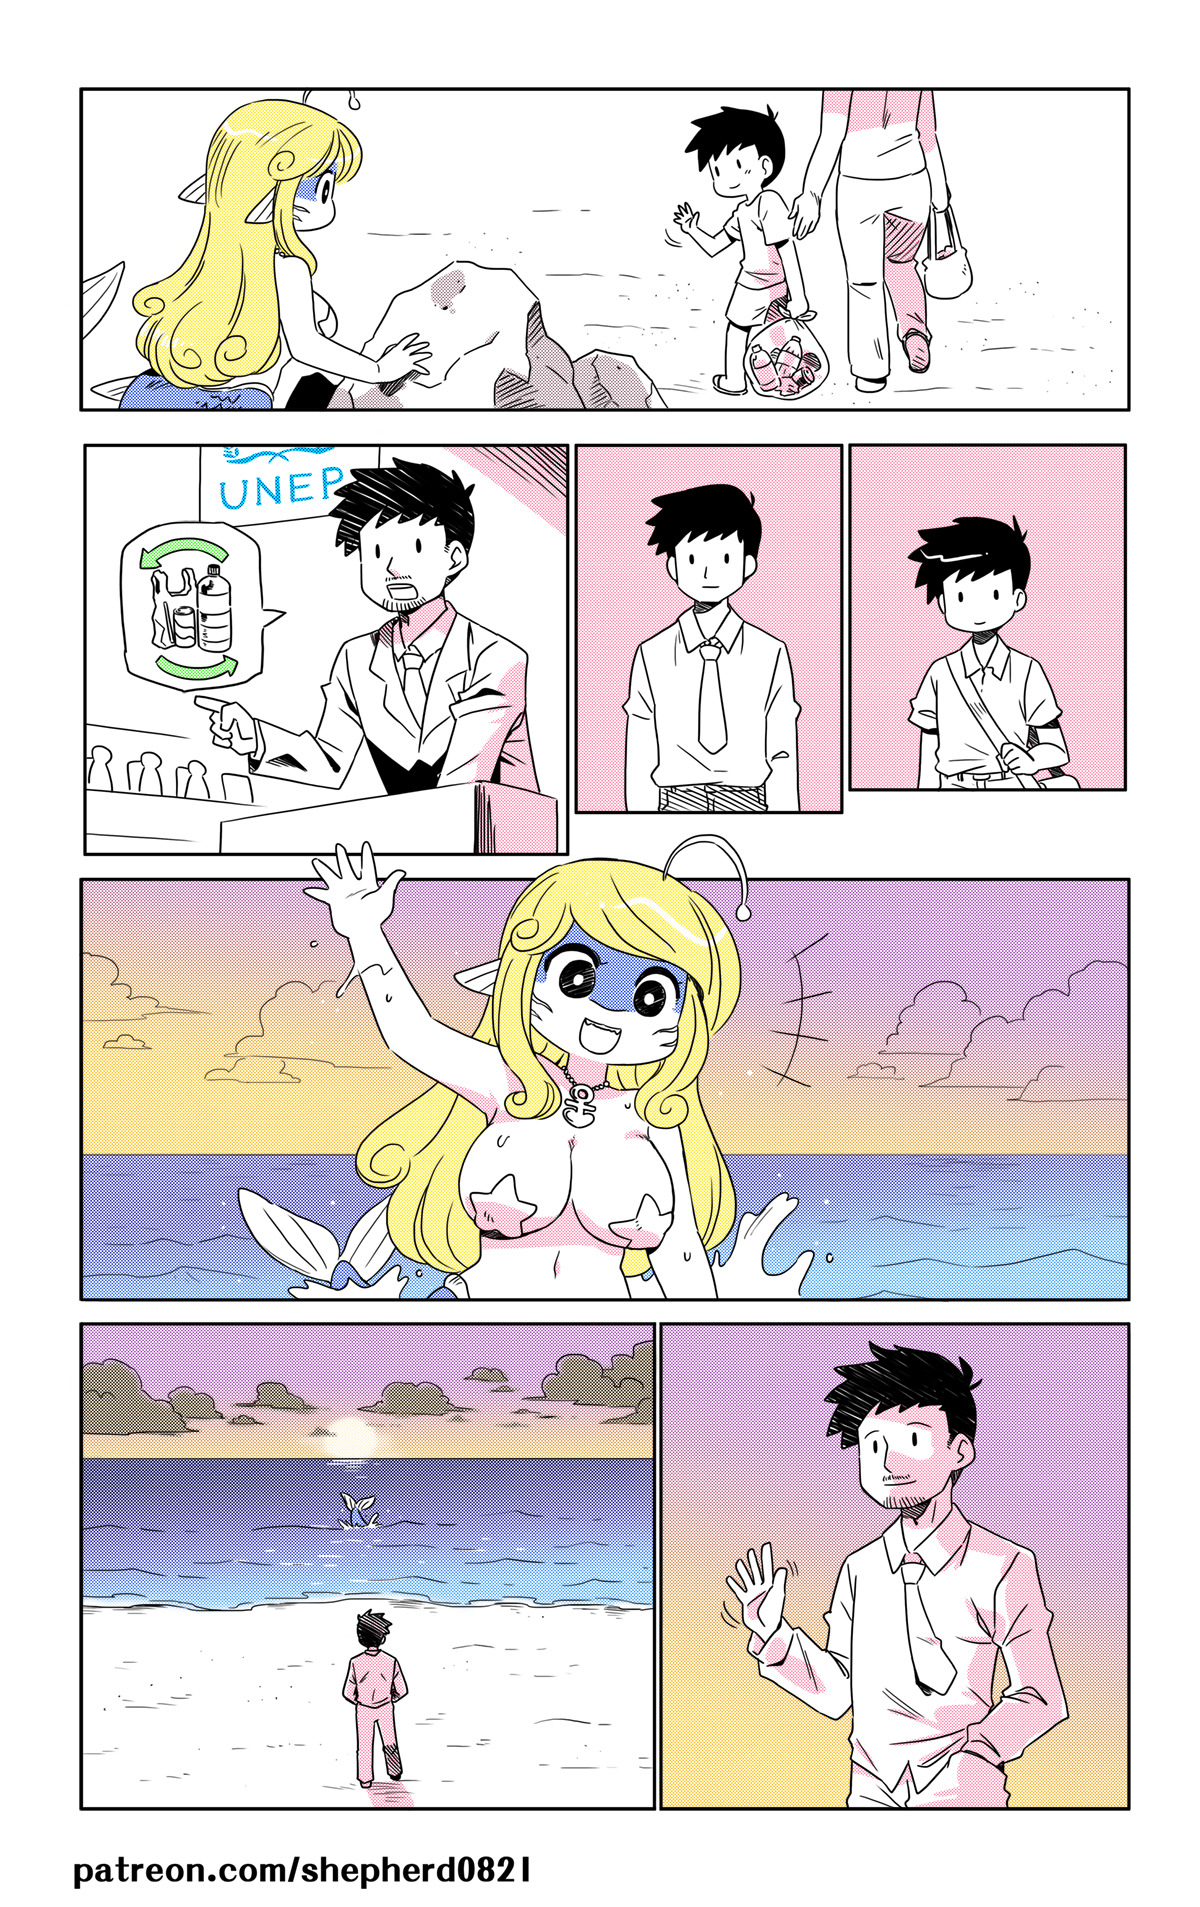  Modern MoGal # 19~20 - sand castle  ／／／／／／／／／／Supporting me